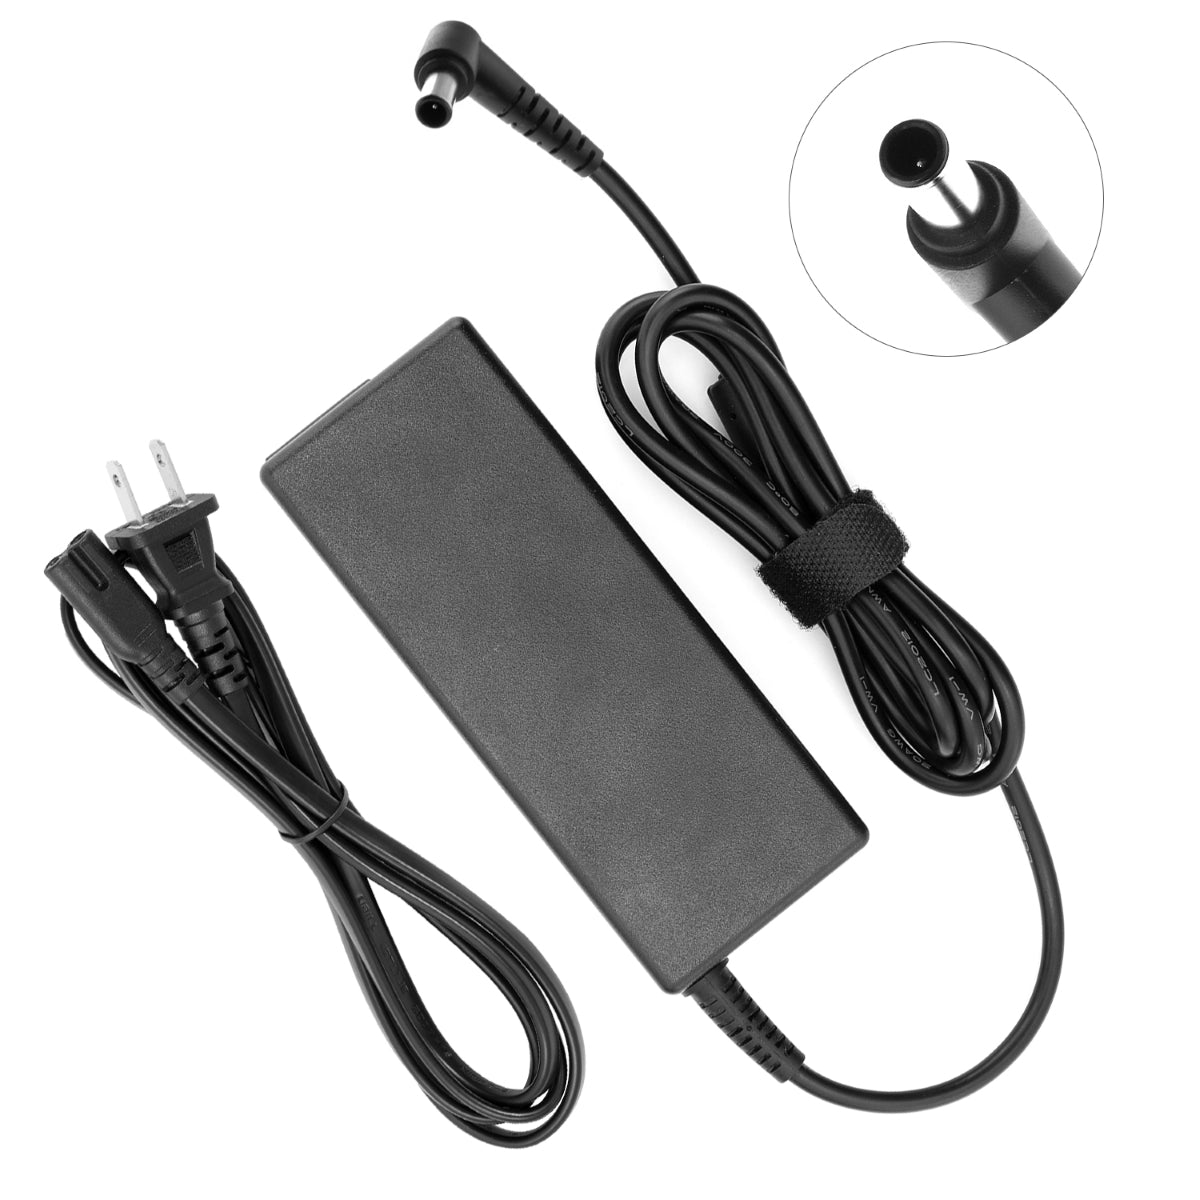 AC Adapter Power Supply for Samsung BN44-00592B Monitor